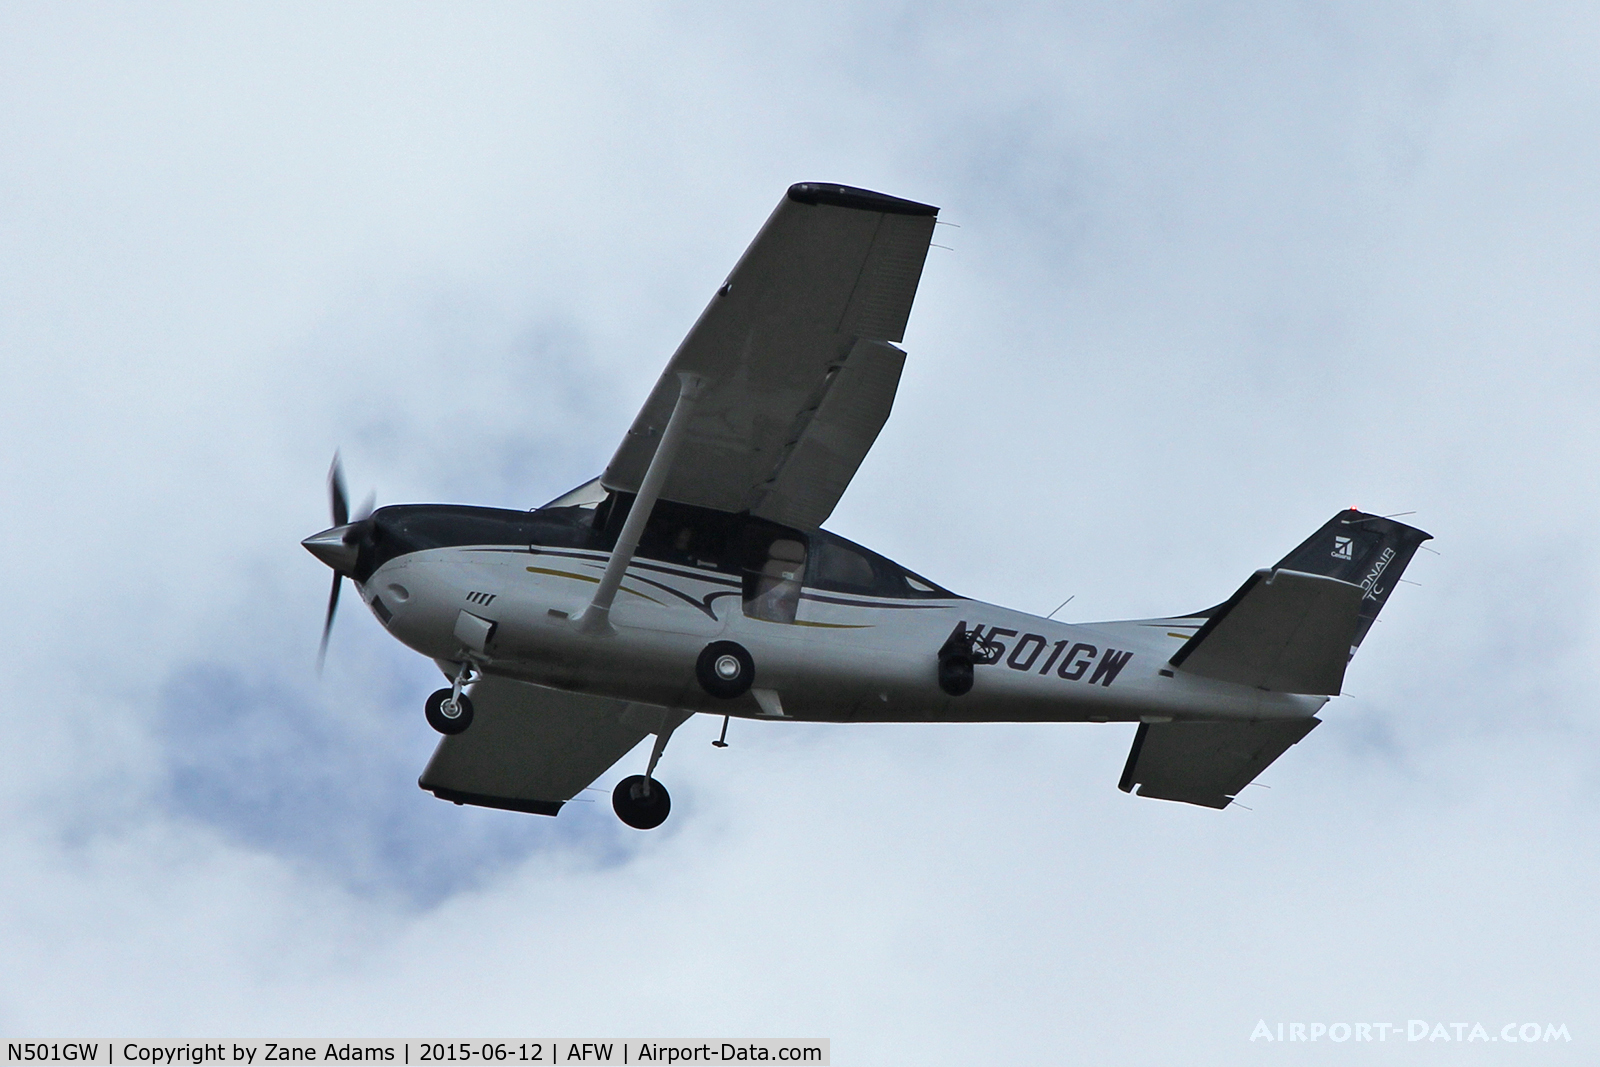 N501GW, 2014 Cessna T206H Turbo Stationair C/N T20609157, Departing Alliance Airport - Fort Worth, Texas